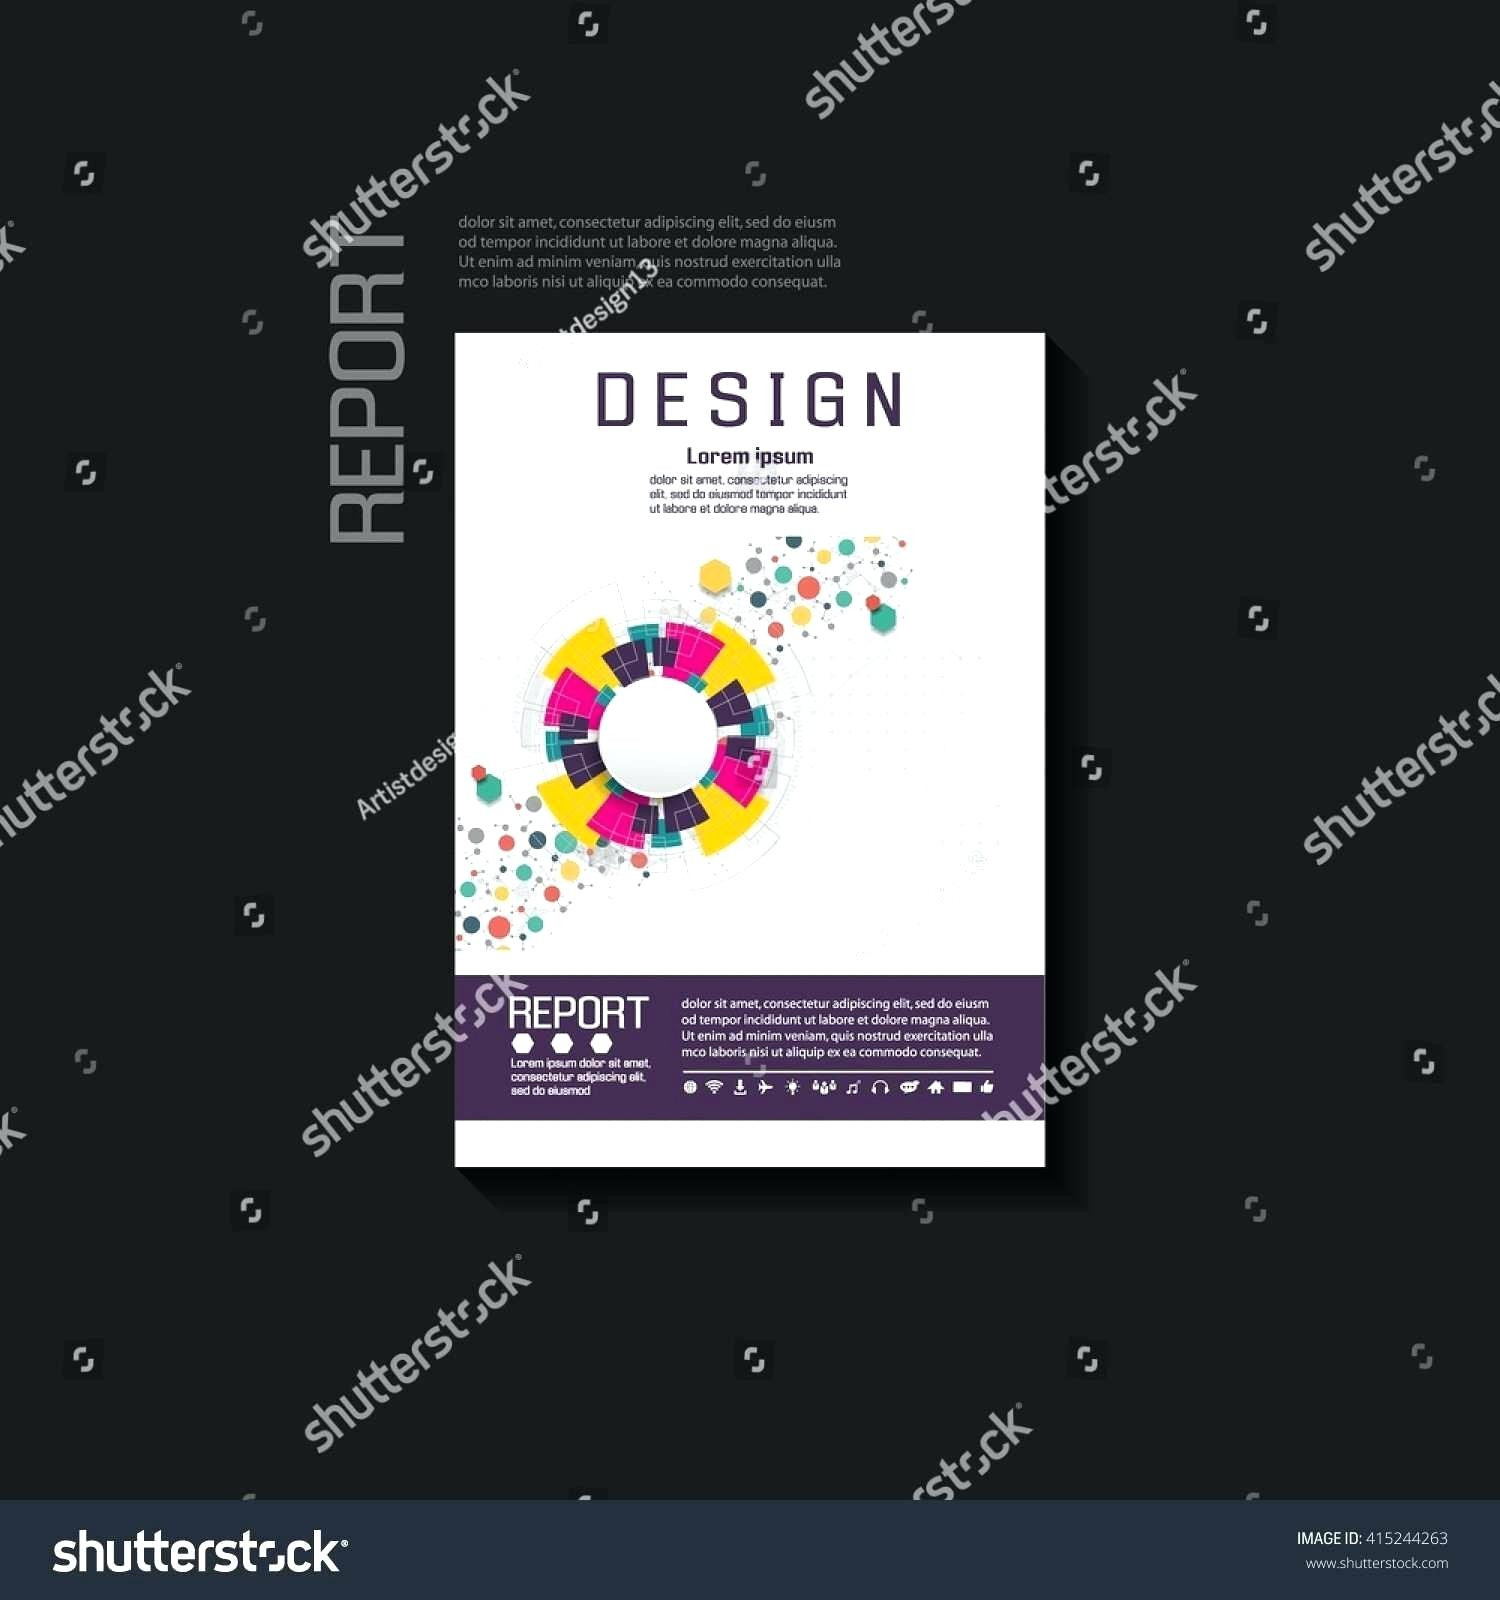 sample business card templates free lovely able inspirational